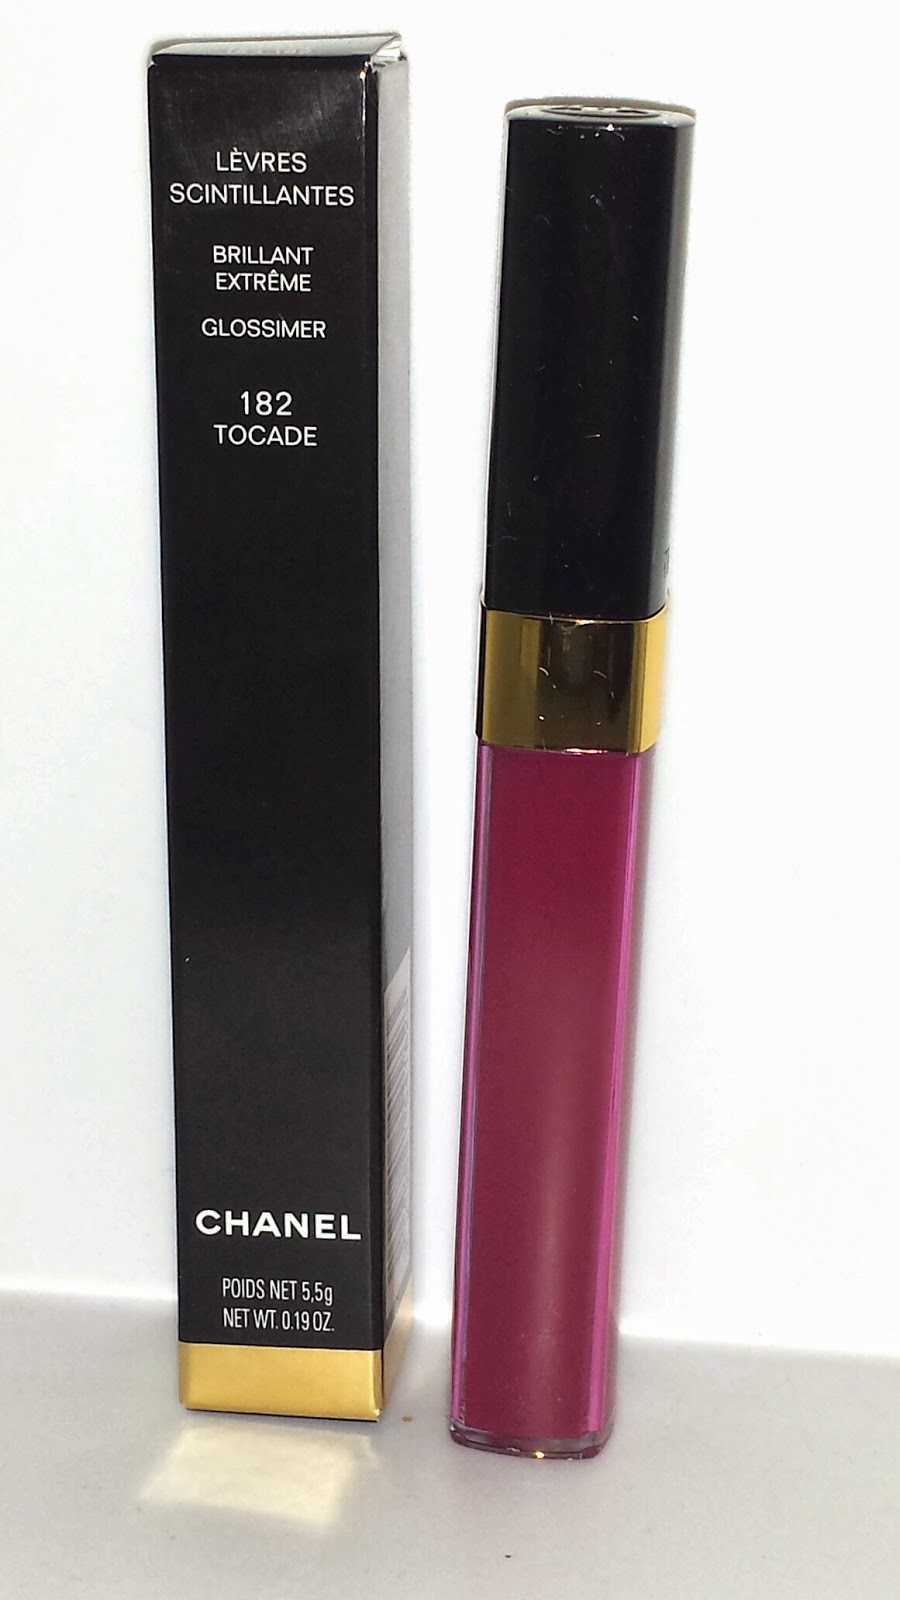 Chanel Tocade (182) Levres Scintillantes Glossimer Review & Swatches